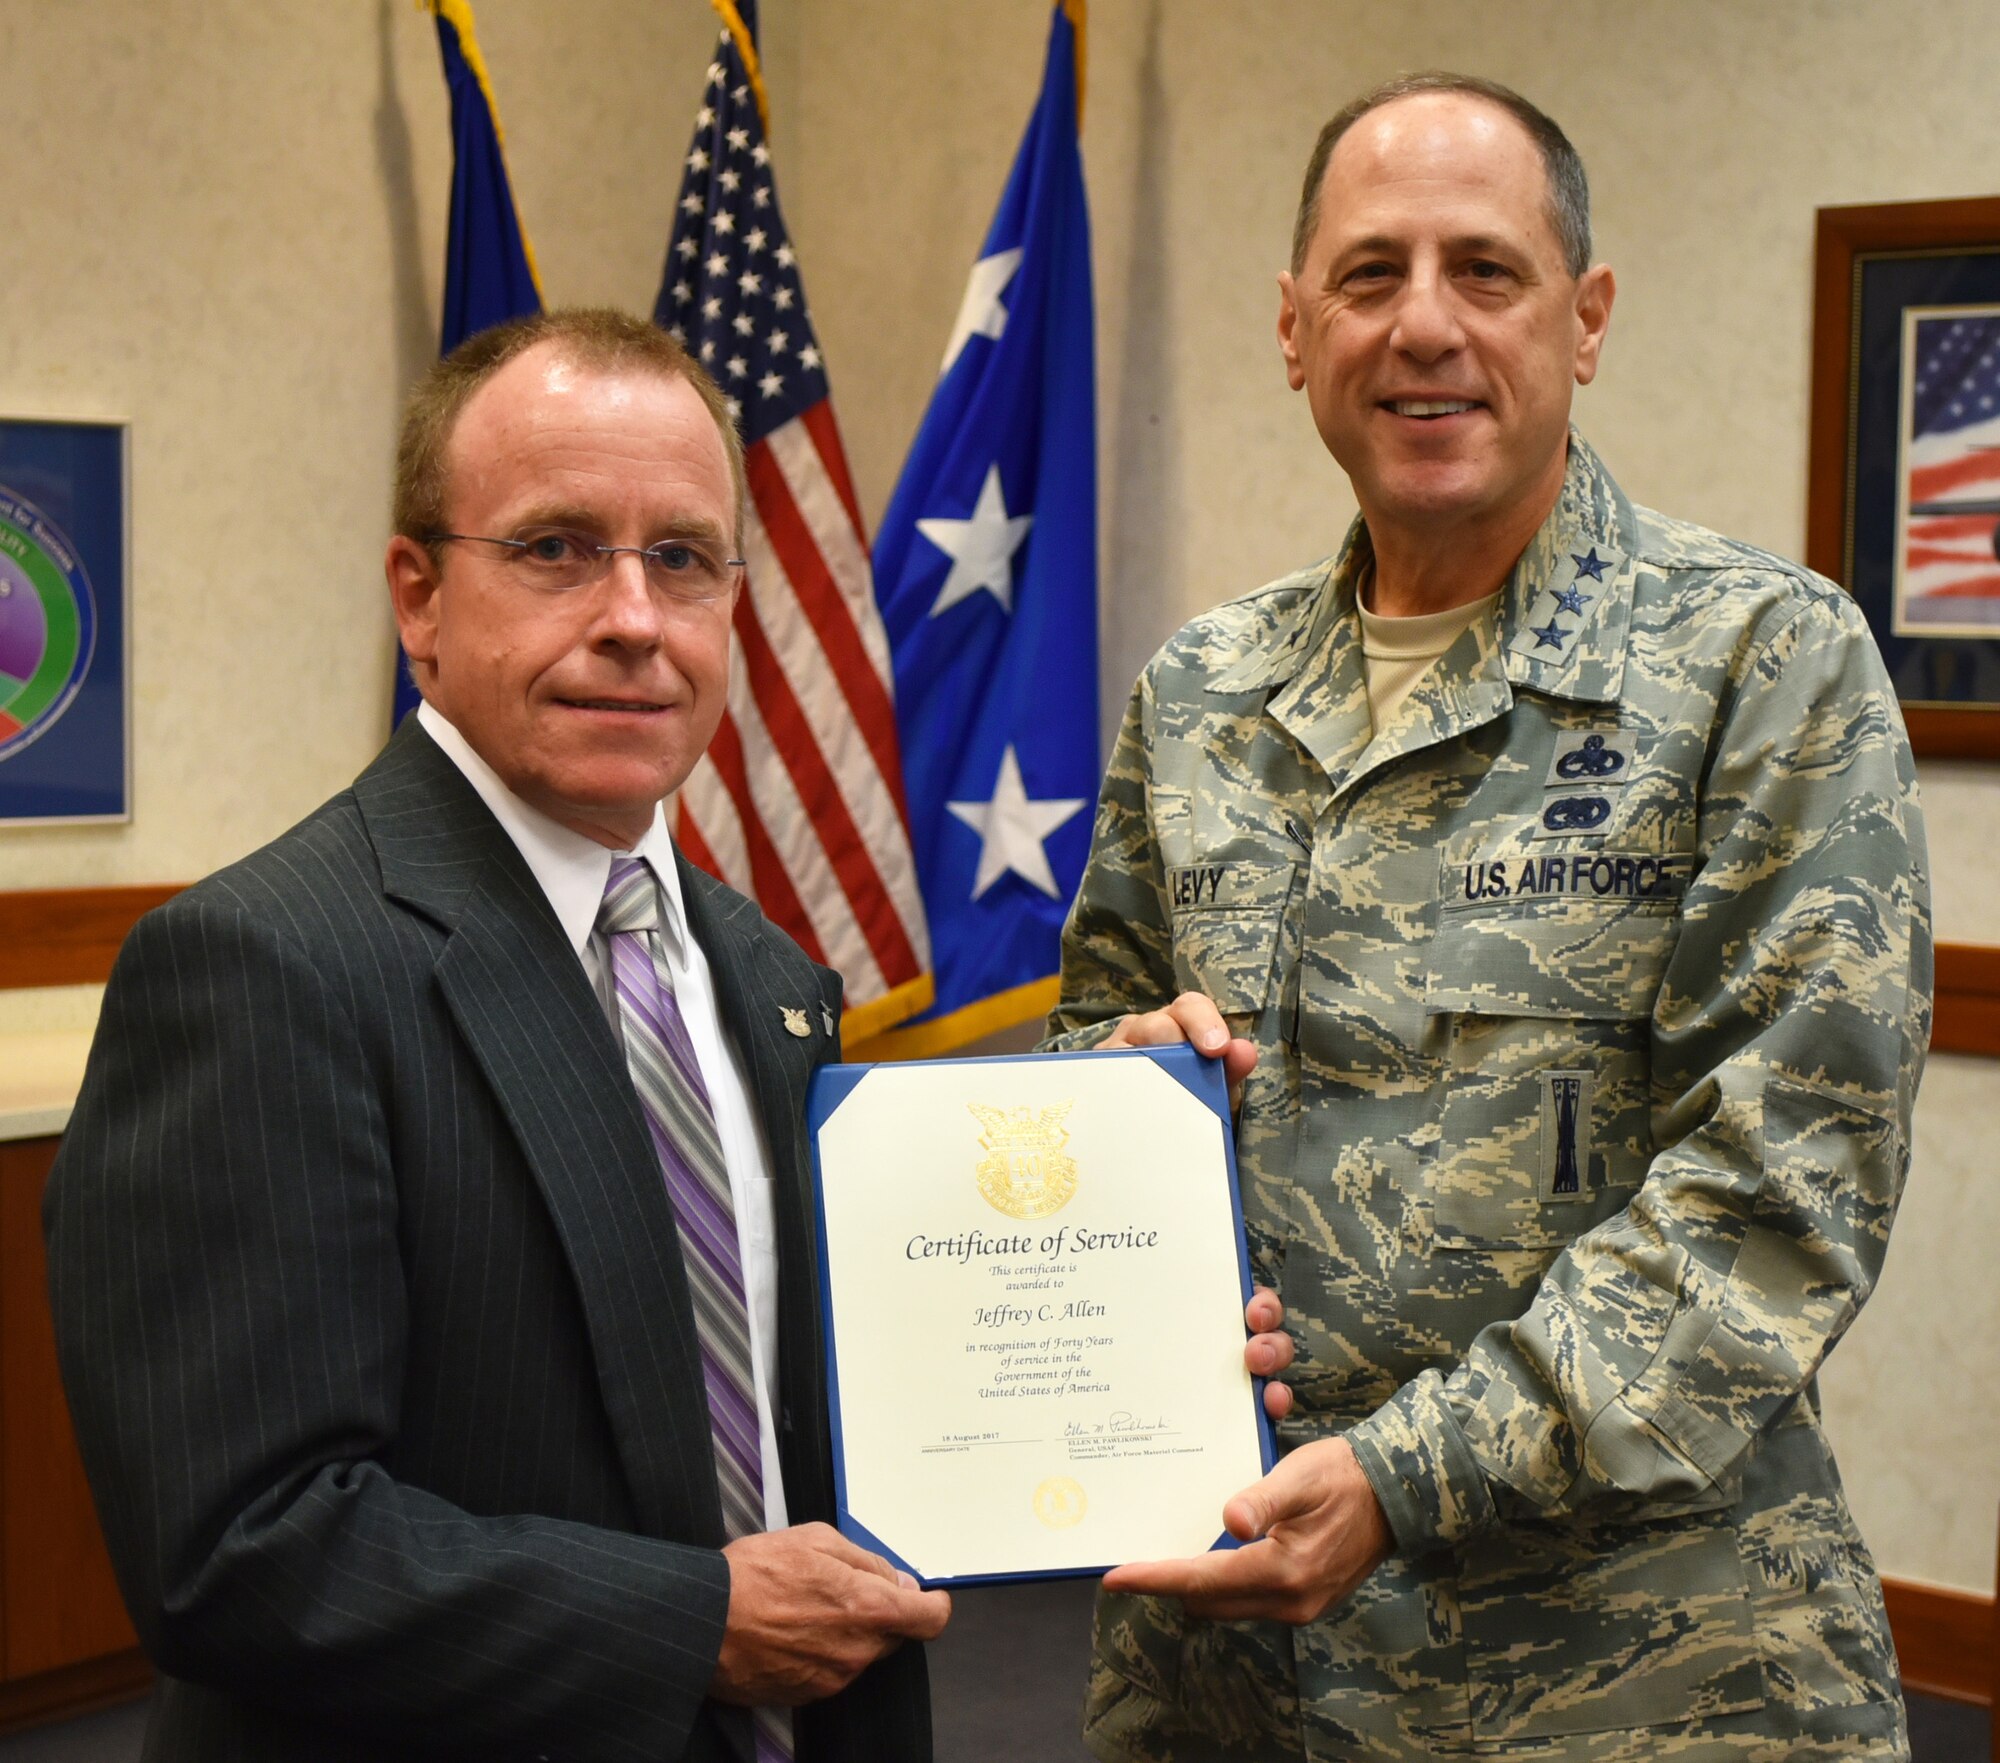 Lt. Gen. Lee K. Levy II, Air Force Sustainment Center commander, presents Jeffrey Allen with a Certificate of Service, recognizing his executive director for 40 years of federal service prior to his weekly staff meeting Aug. 10 in Bldg. 3001.